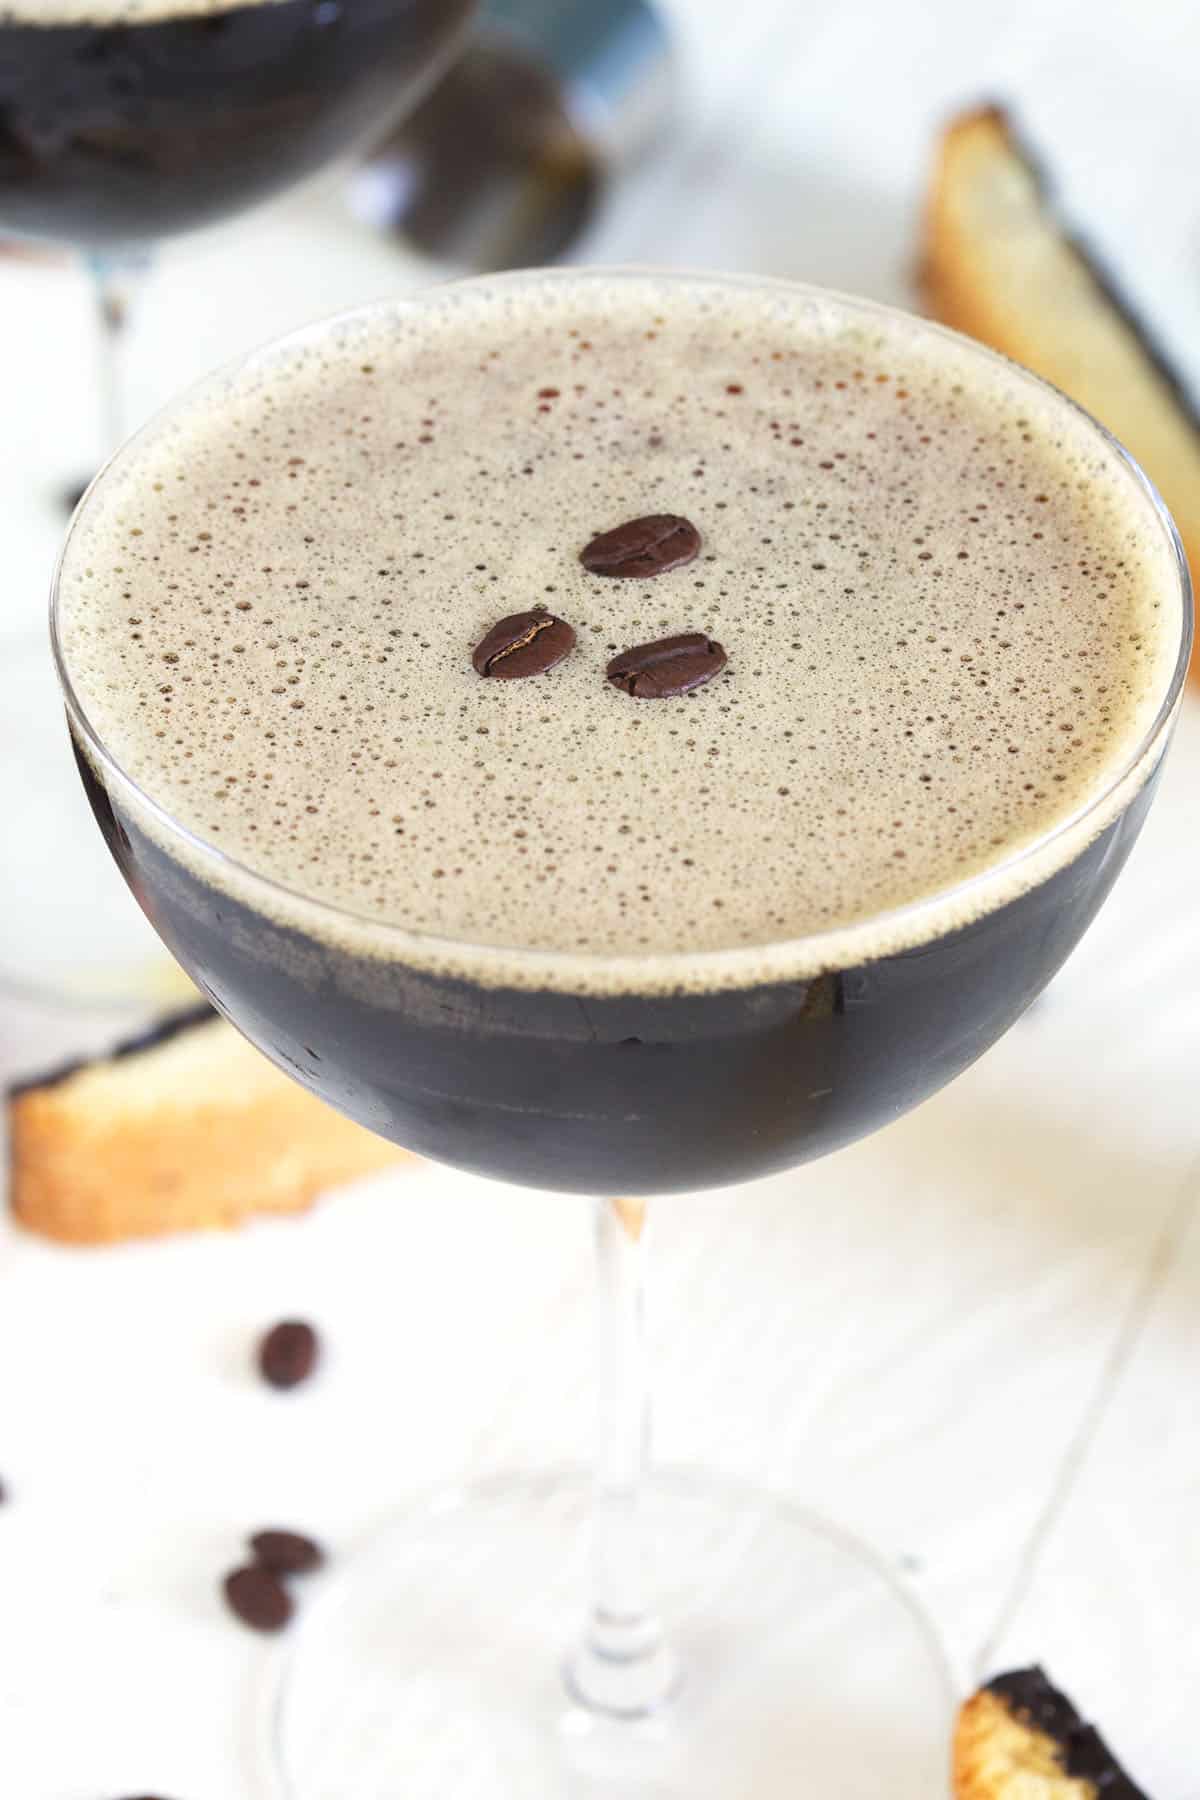 A martini glass is filled to the brim and topped with three coffee beans.